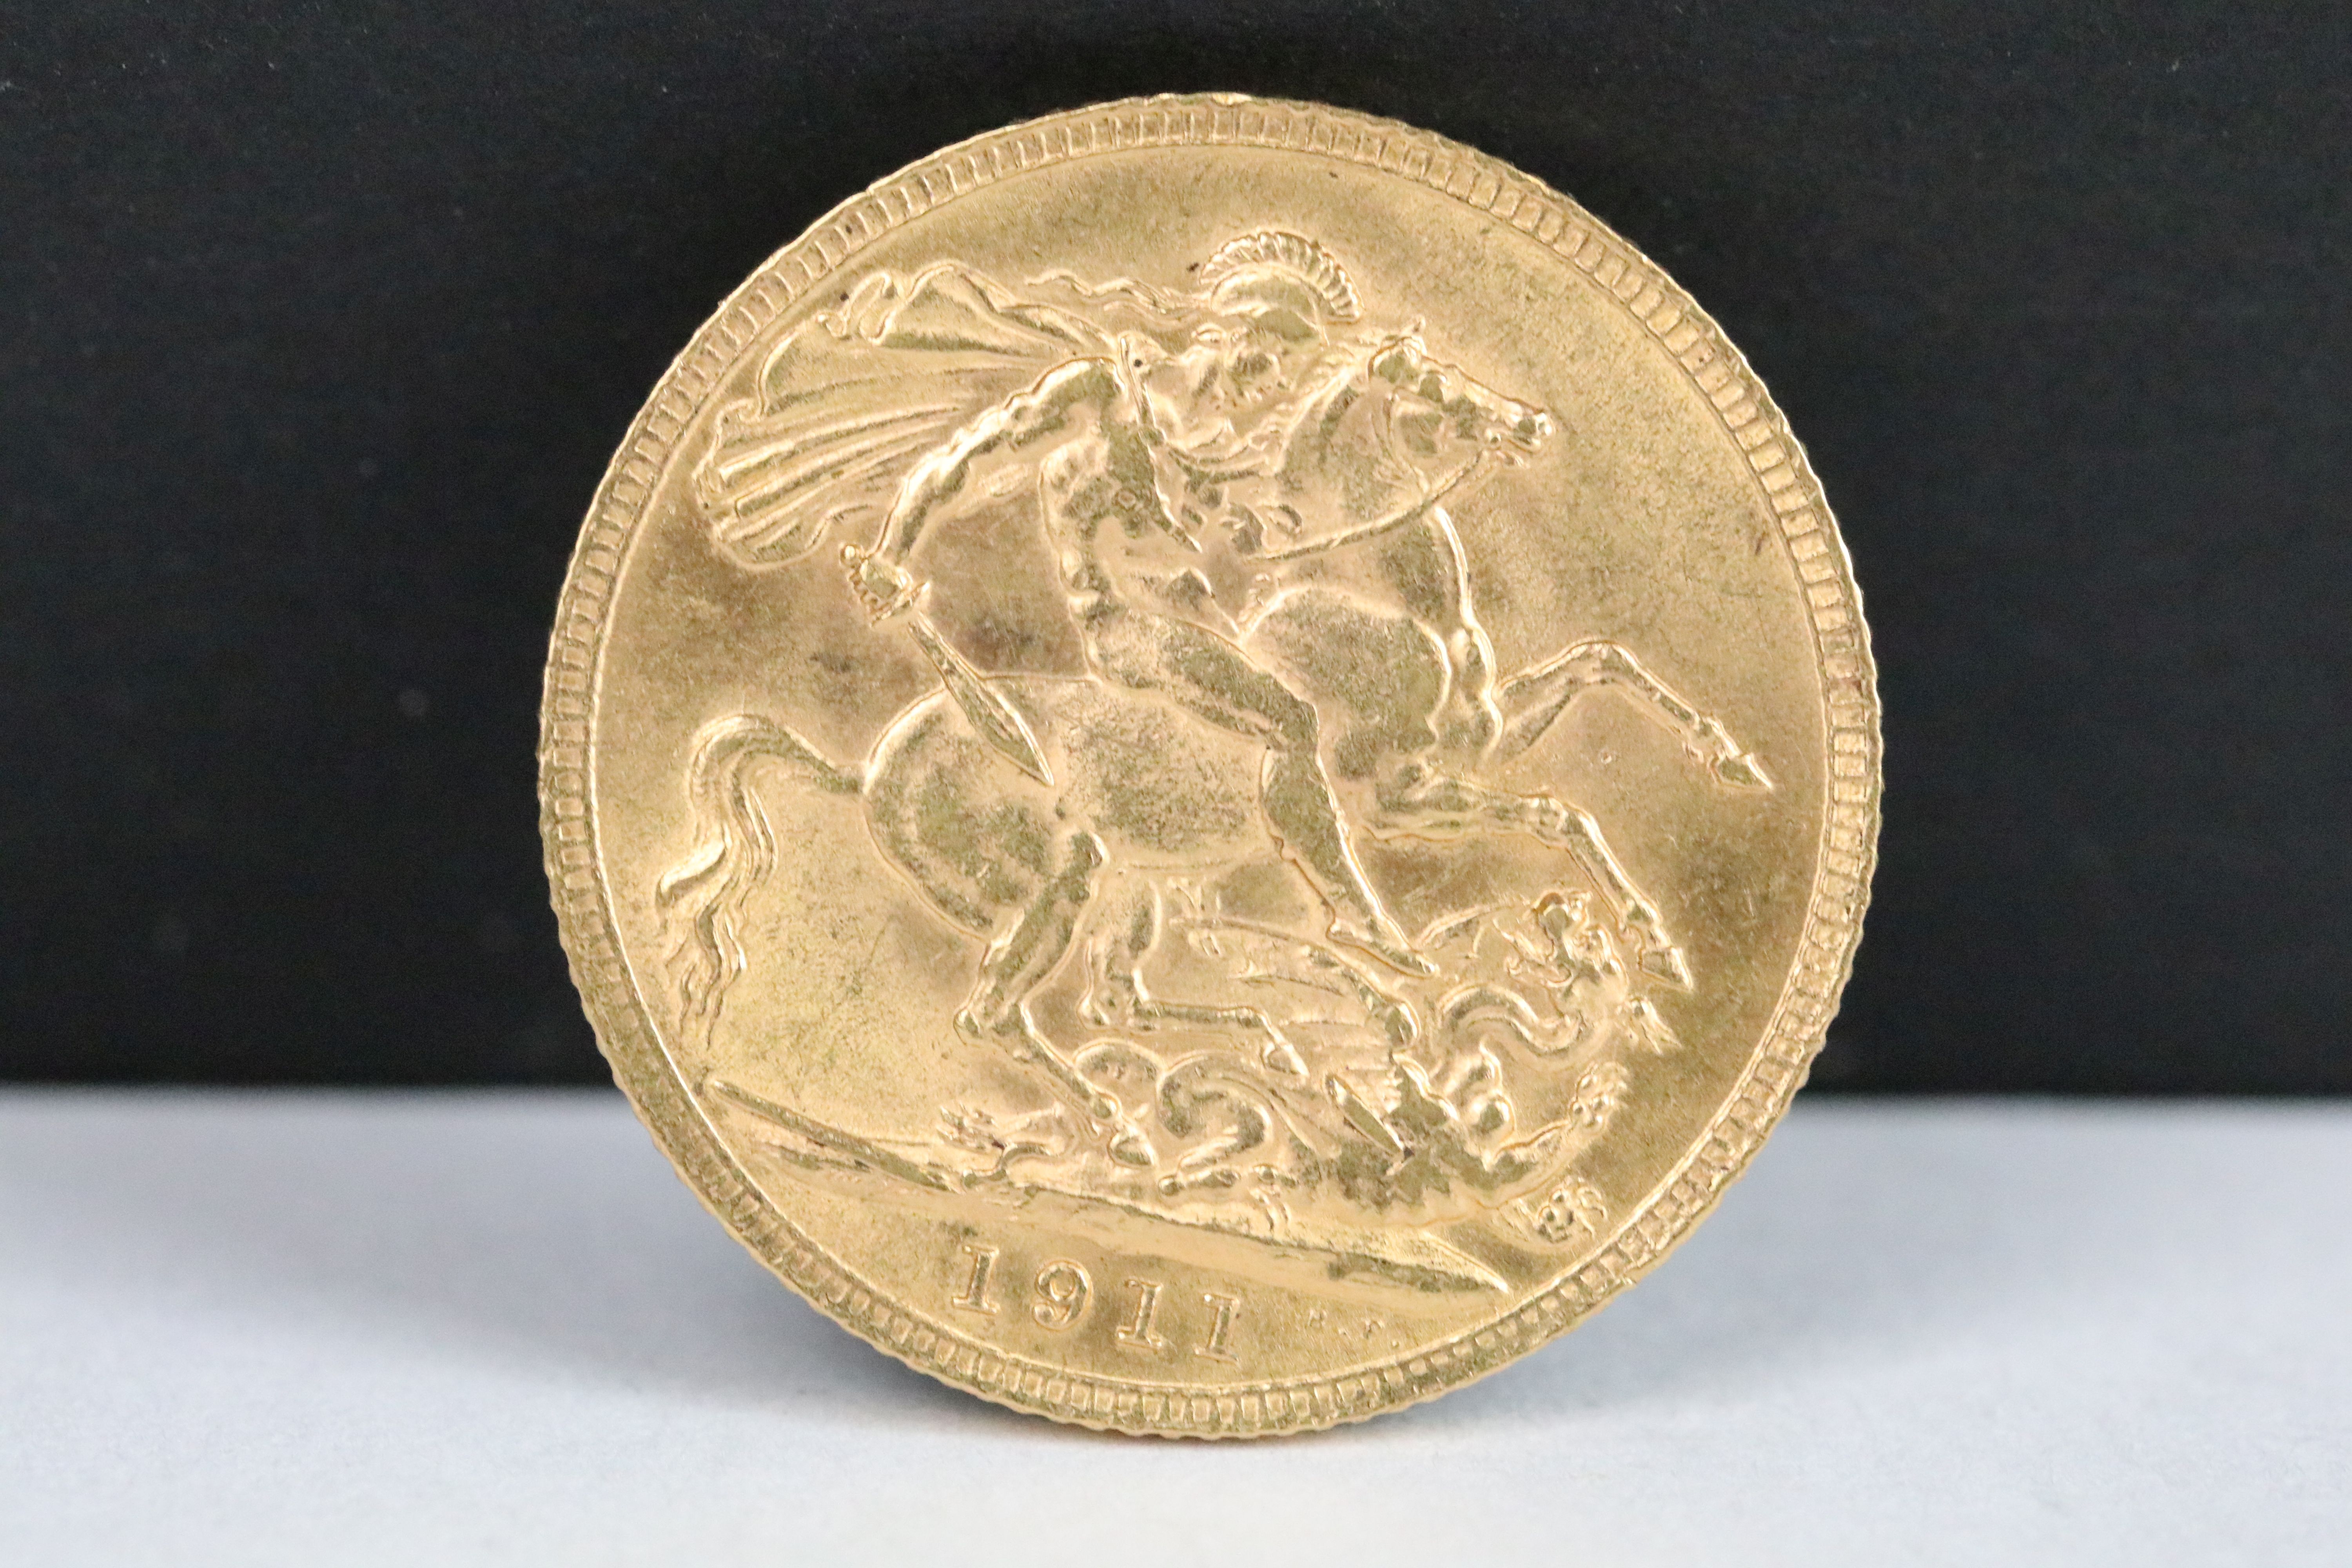 A British King George V 1911 gold full sovereign coin.